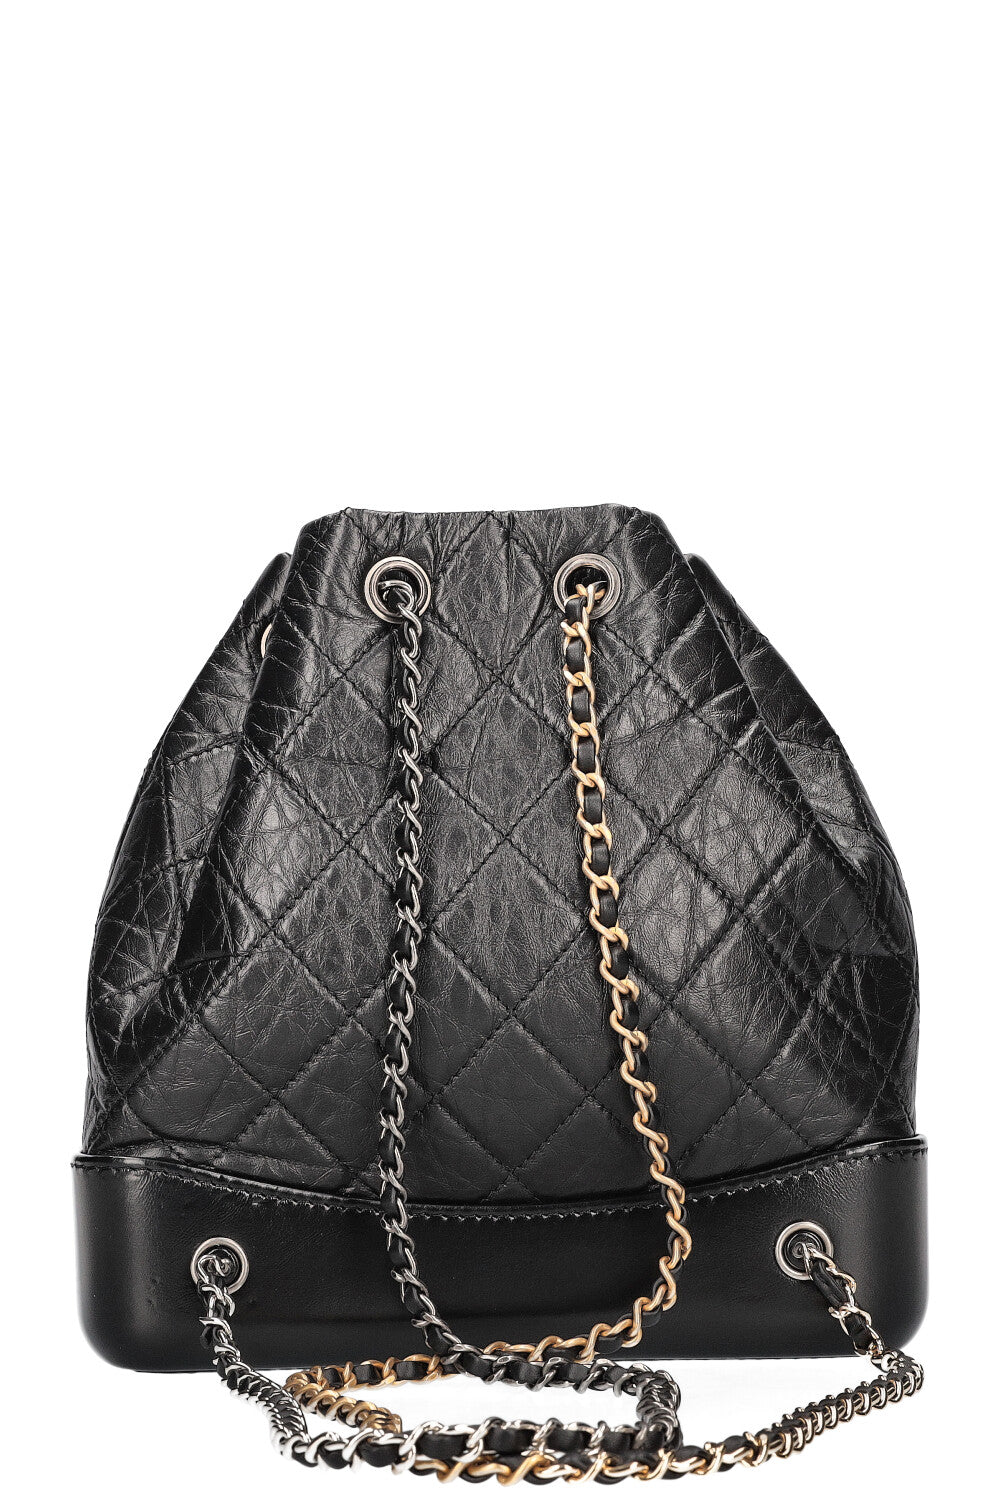 CHANEL Gabrielle Backpack Small Black